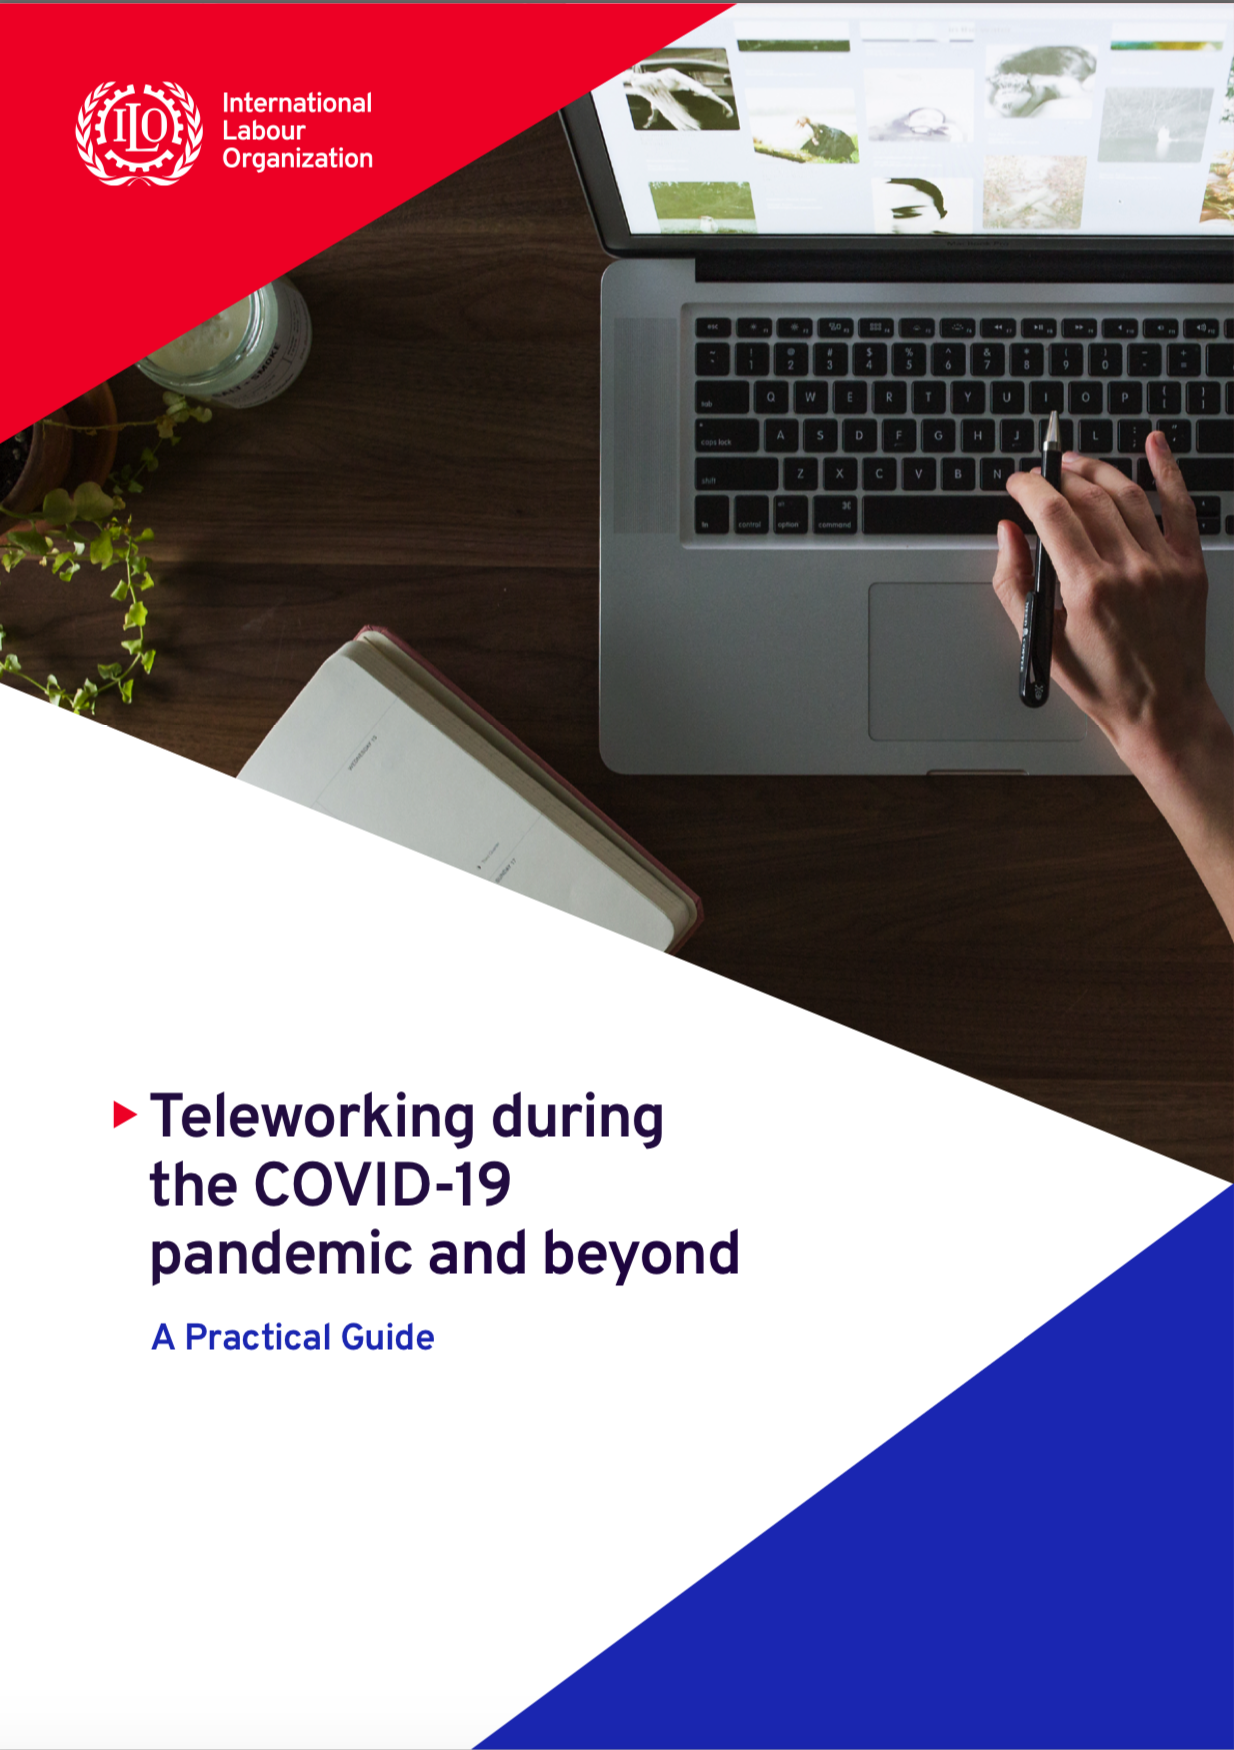 Practical Guide on Teleworking during the COVID-19 pandemic and beyond